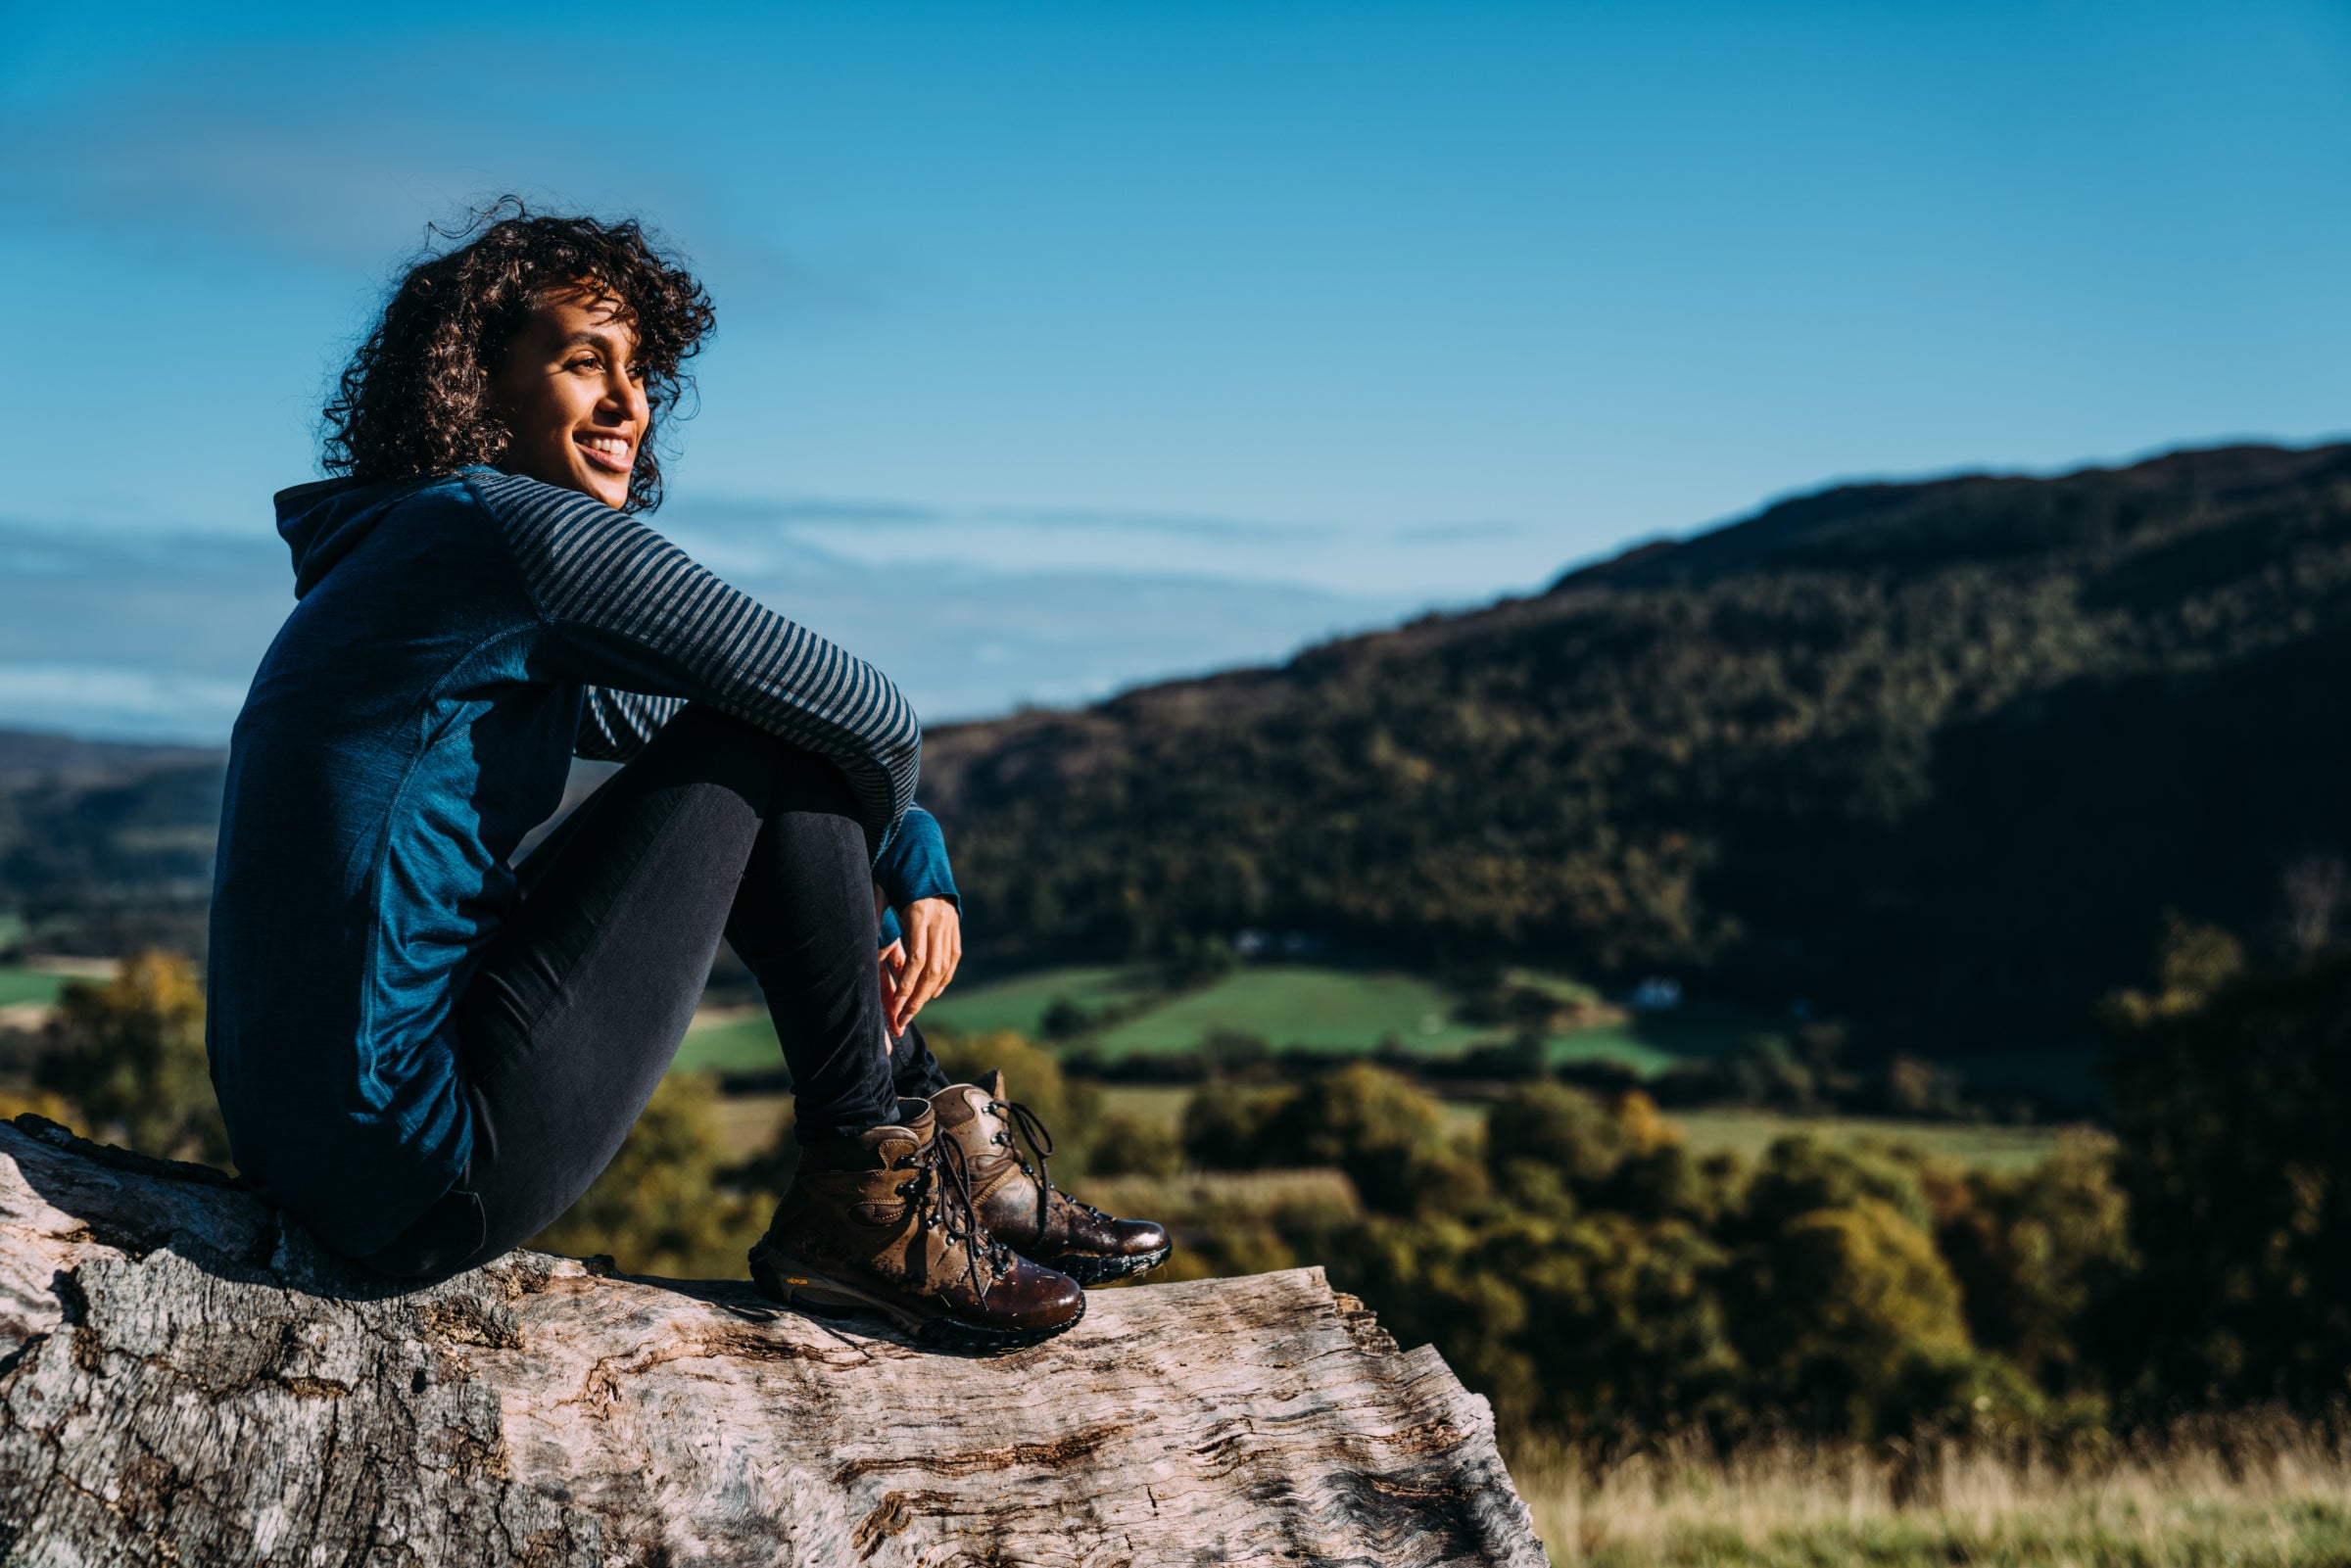 A person sits atop a log in the wilderness, dressed in adventure gear including a blue Isobaa merino wool zip top, smiling and enjoying the view